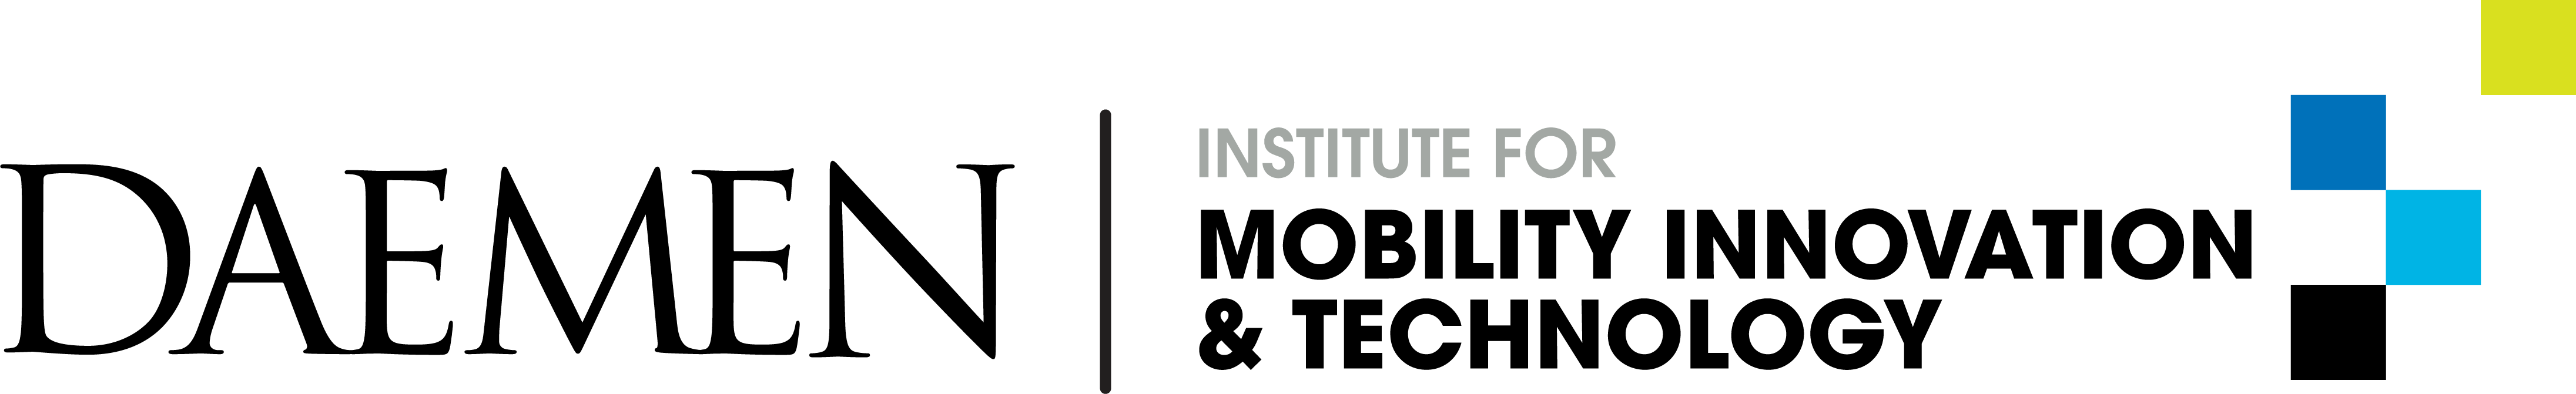 Todd and Leslie Shatkin Institute for Mobility, Innovation, and Technology logo